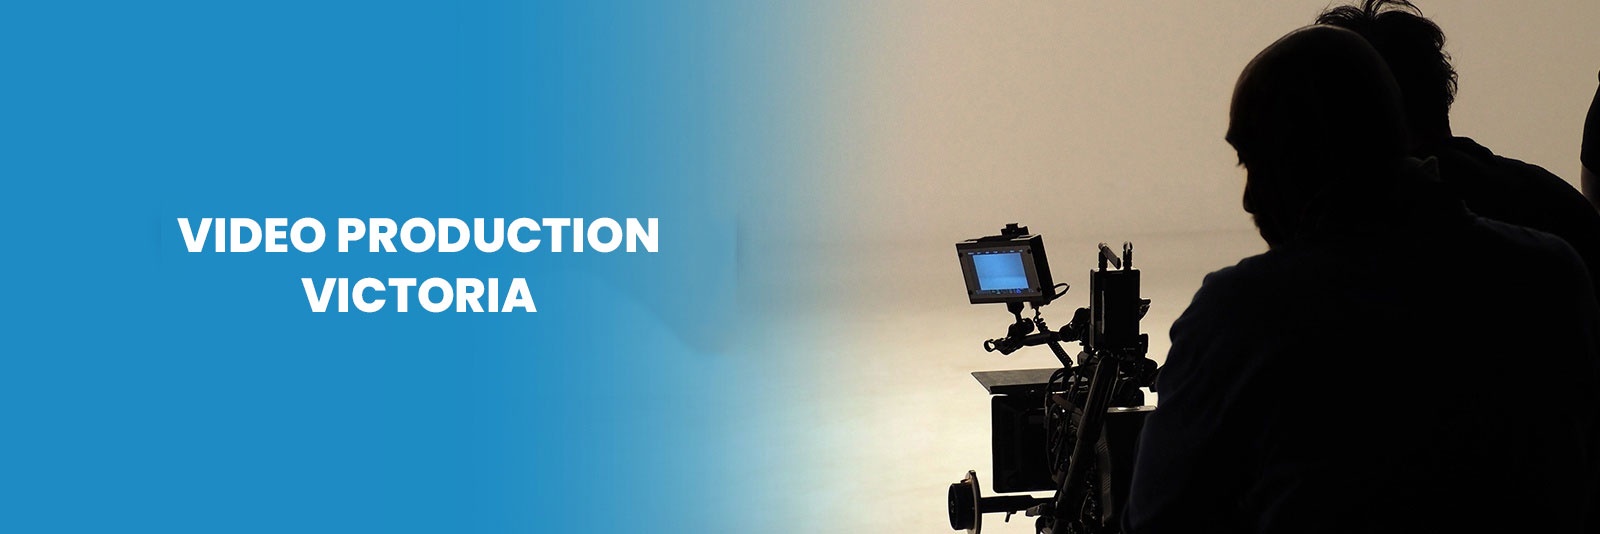 Video Production Services In Victoria 